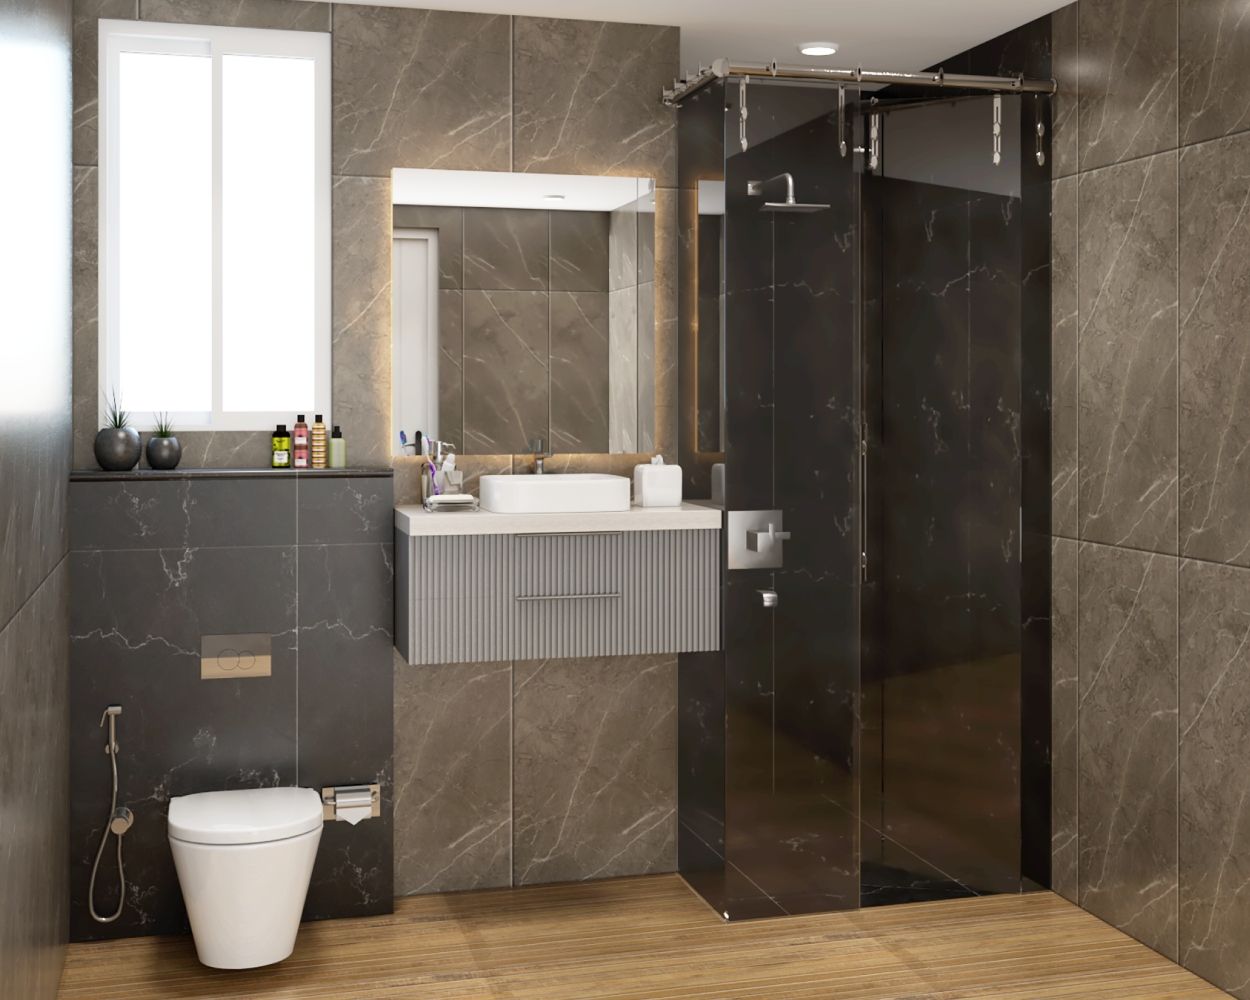 Contemporary Black And Brown Bathroom Design With Square Mirror